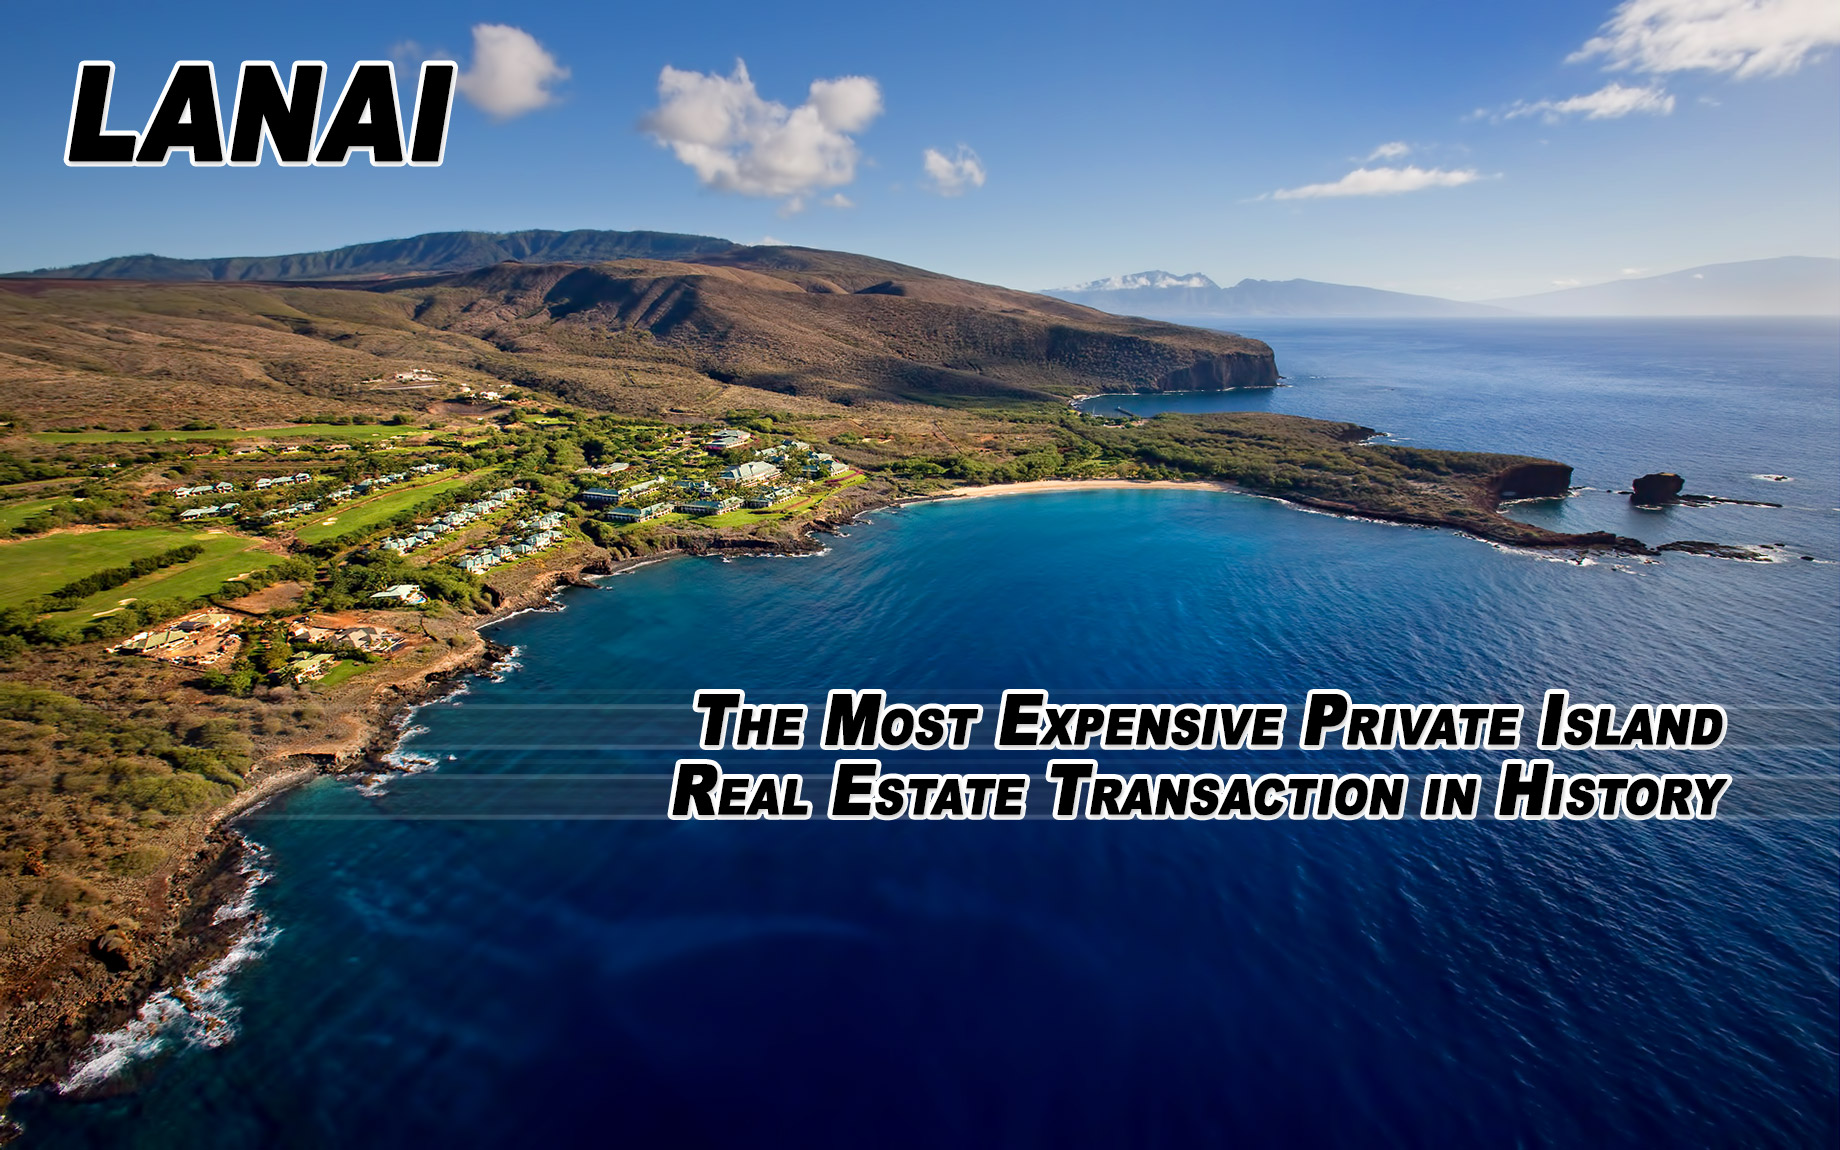 Lanai - The Most Expensive Private Island Real Estate Transaction in History